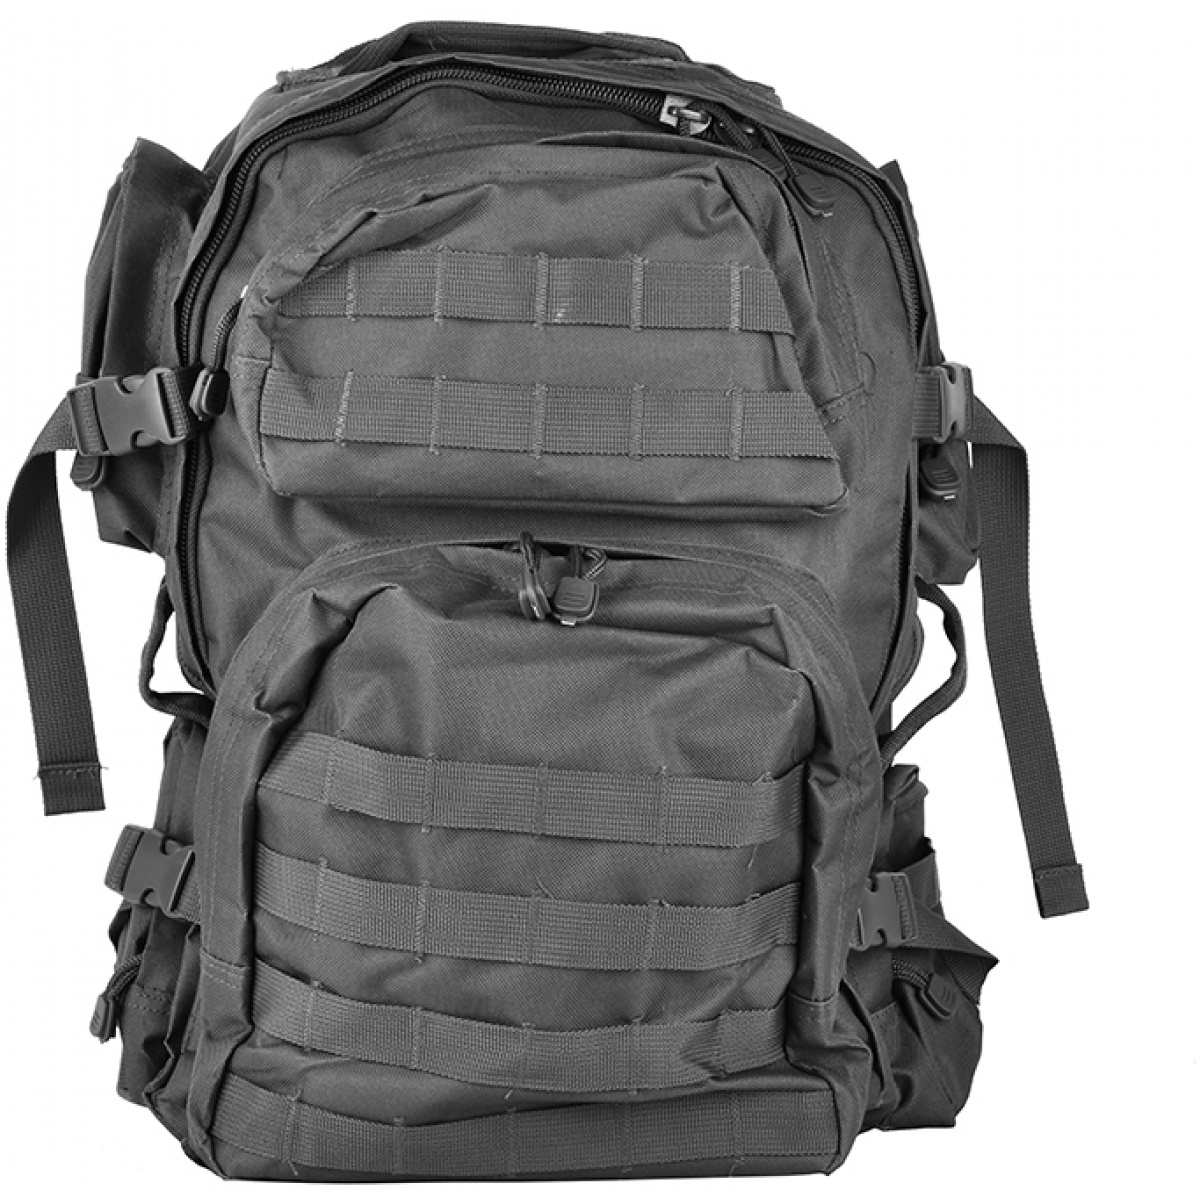 NcStar VISM Tactical Assault MOLLE Airsoft Backpack - Urban Gray ...